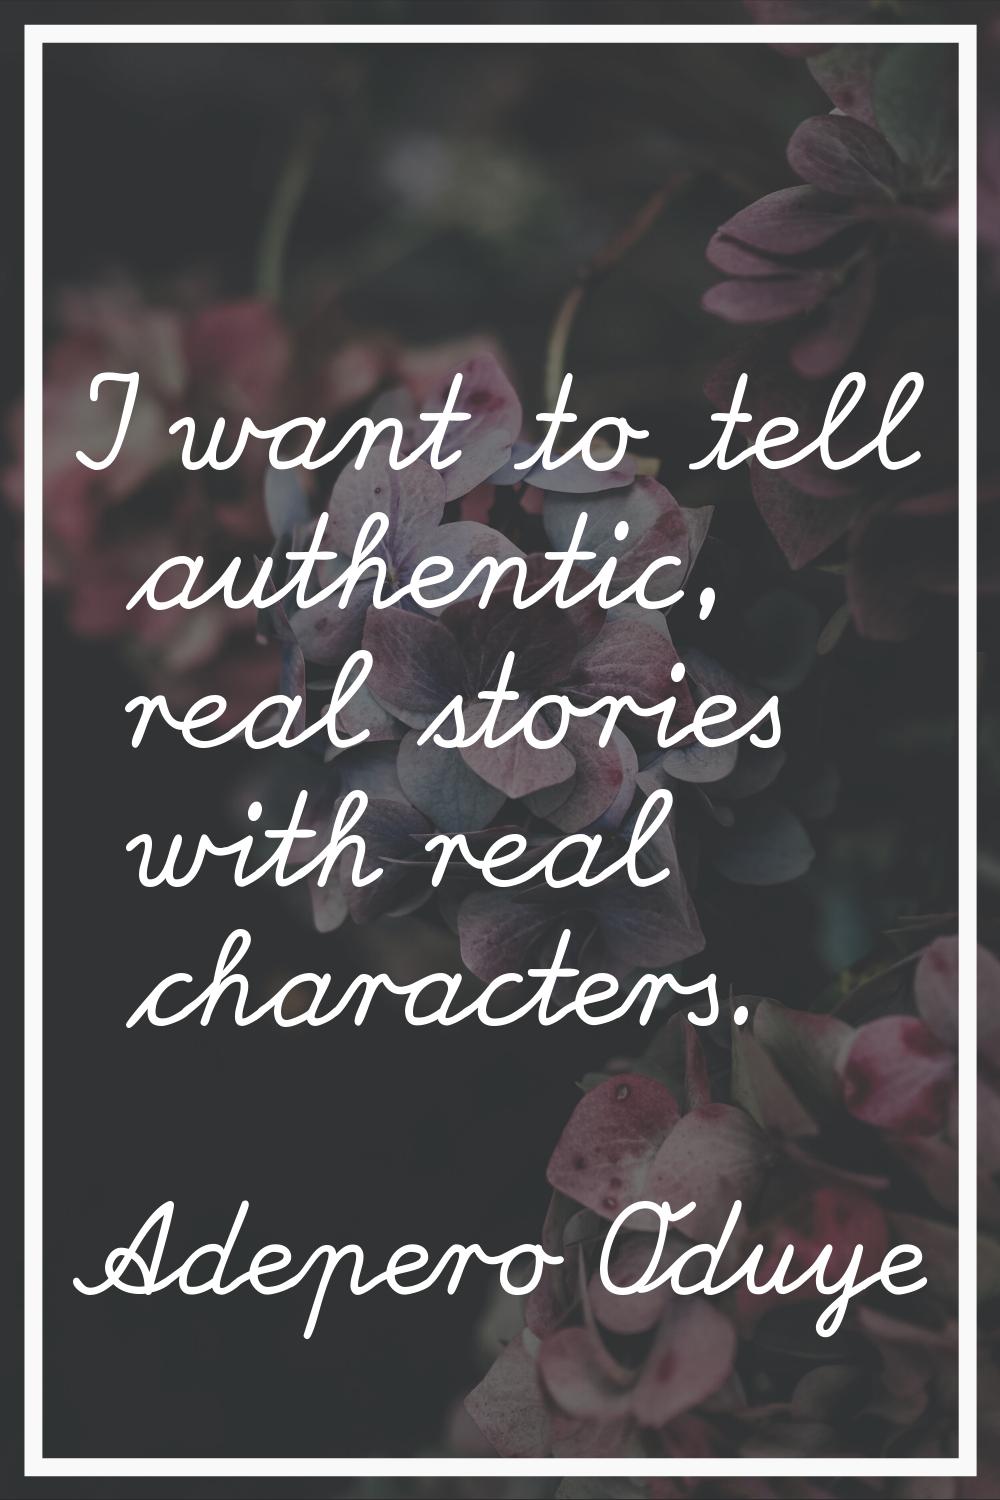 I want to tell authentic, real stories with real characters.